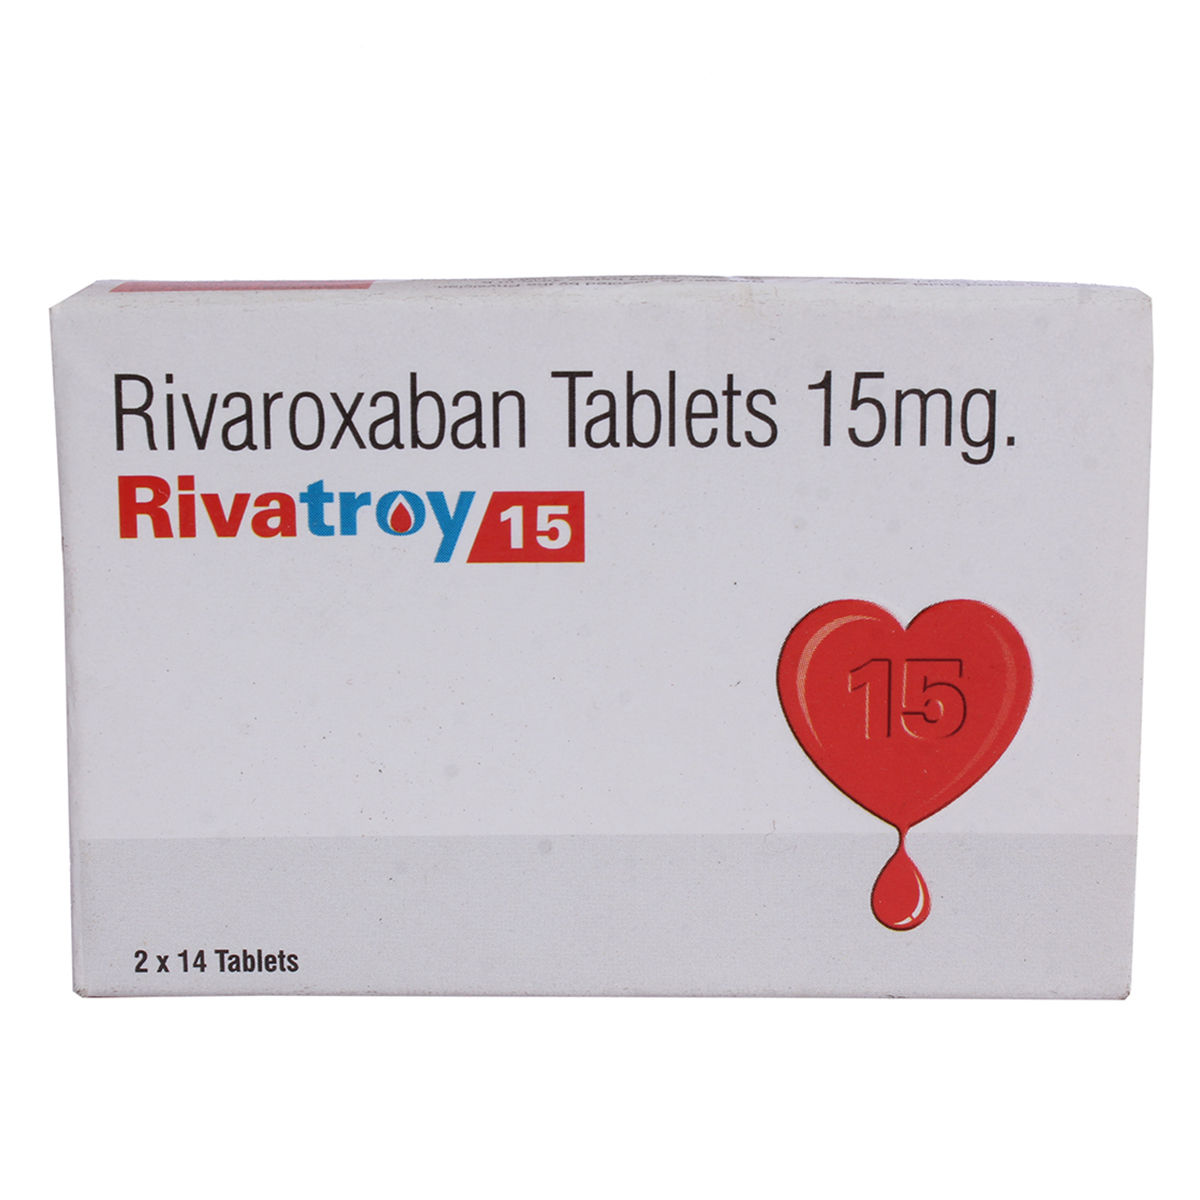 Rivatroy 15 Tablet 14's, Pack of 14 TABLETS